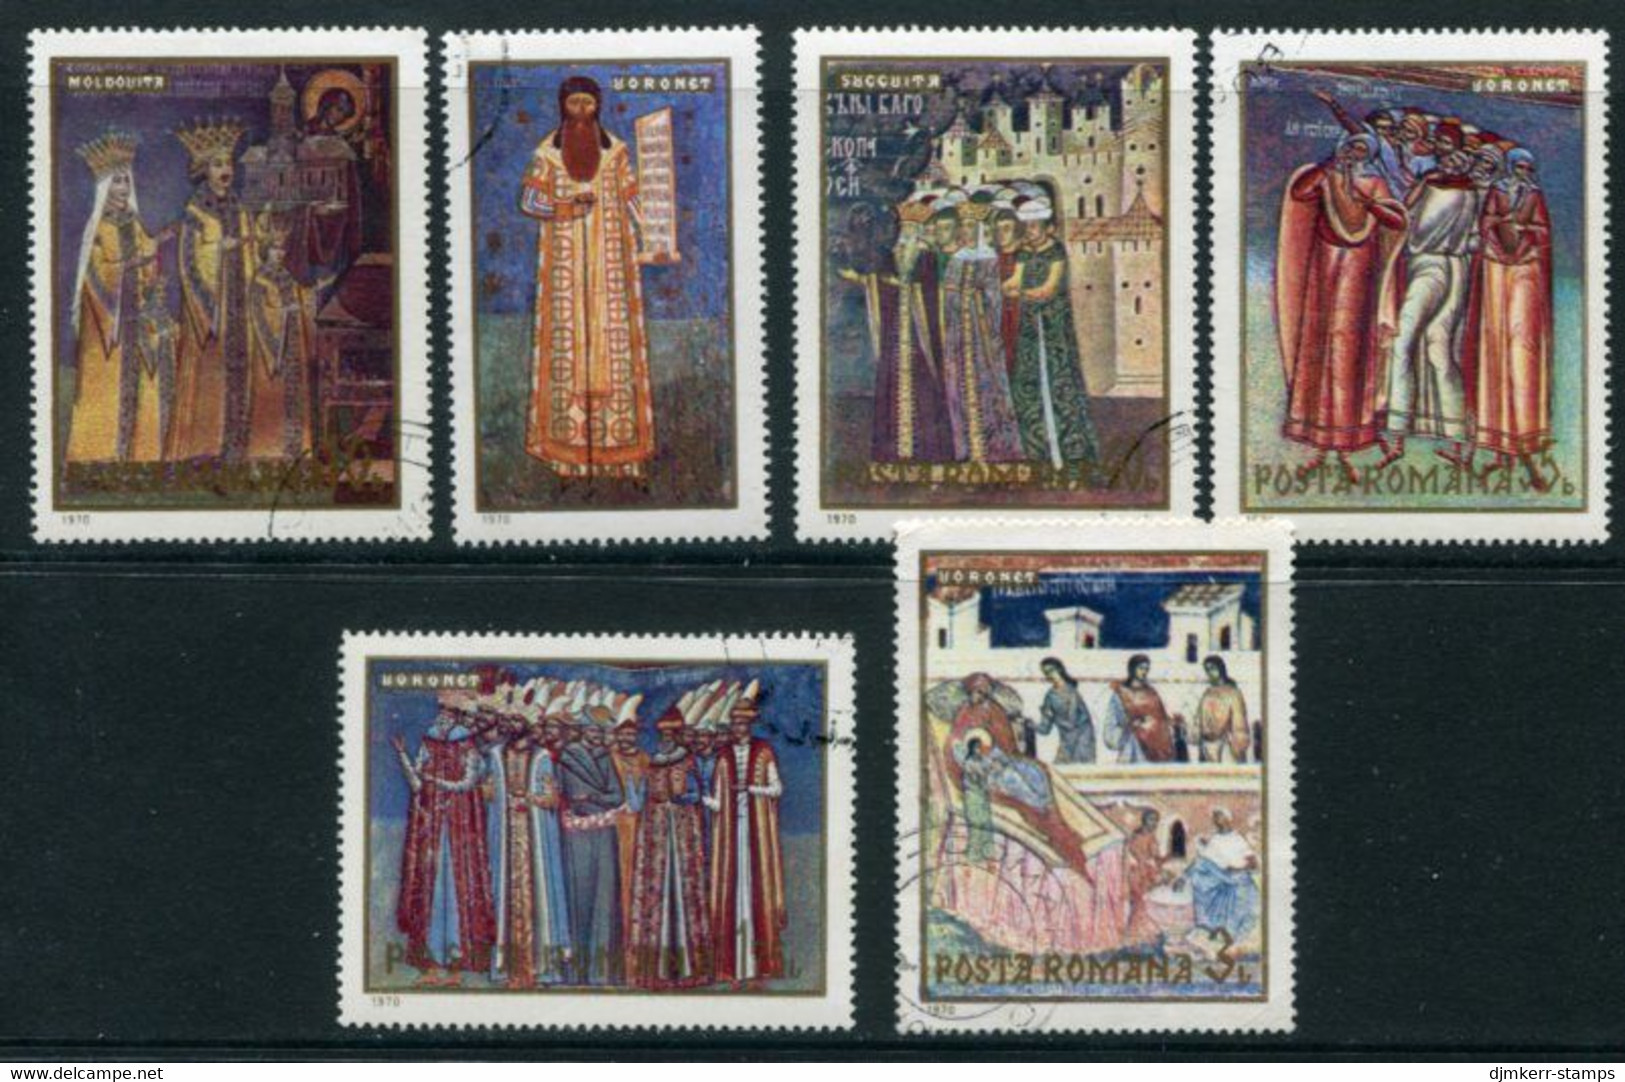 ROMANIA 1970 Monastery Frescoes Used  Michel 2856-61 - Used Stamps